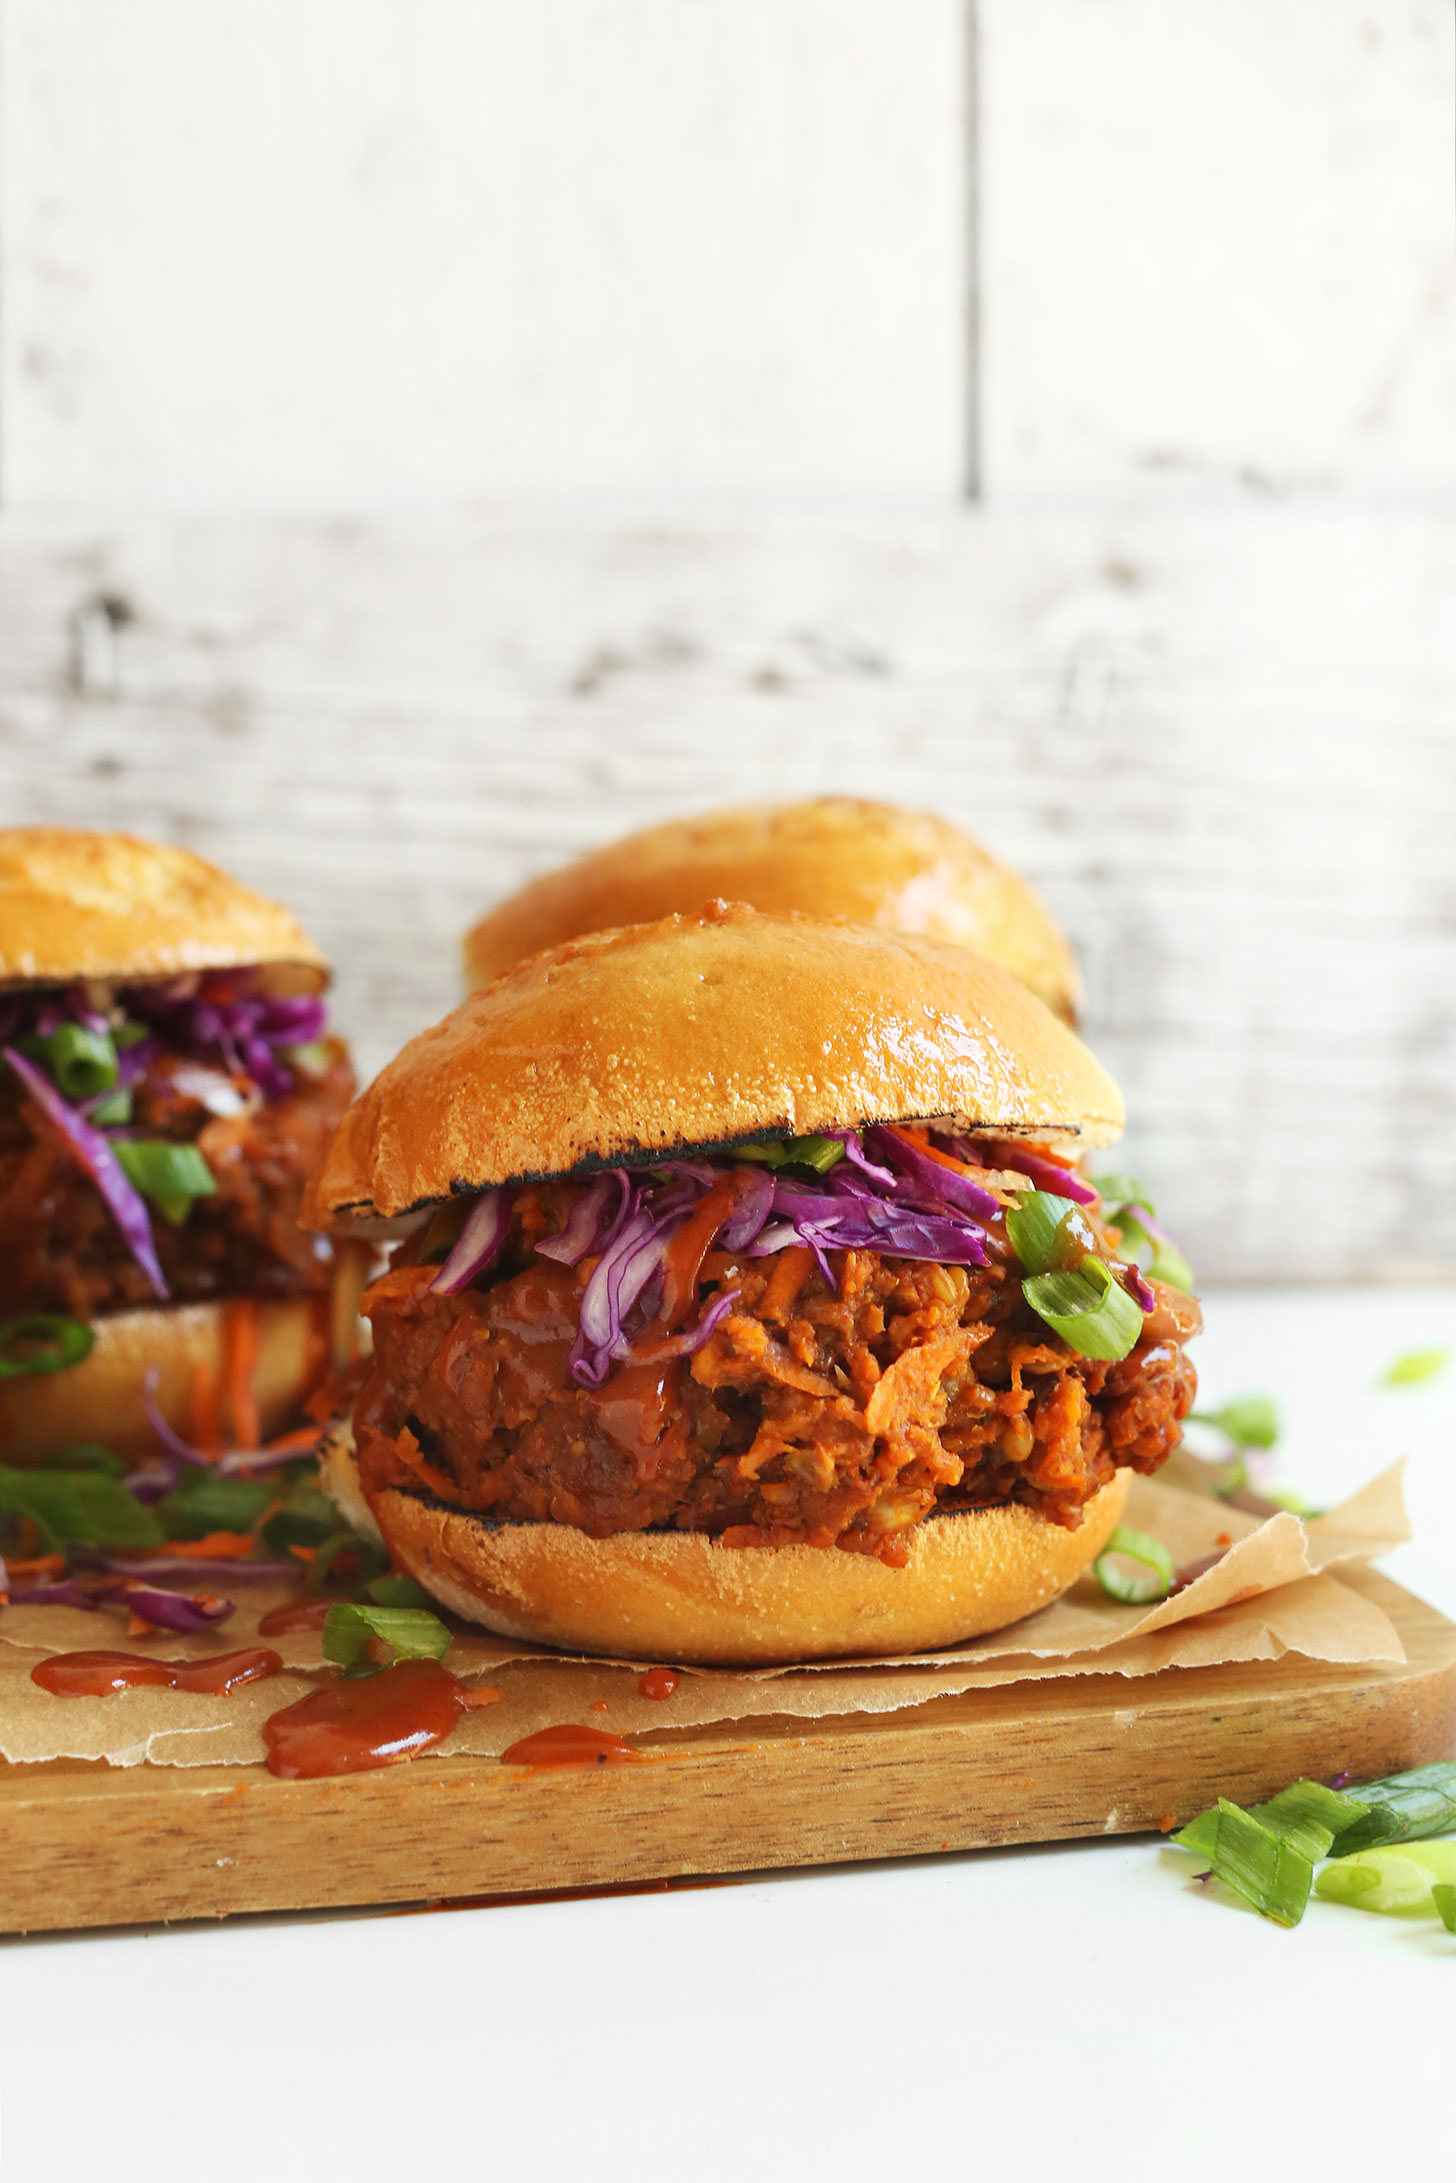 The-best-vegan-pulled-pork-sandwich-lentils-carrots-packed-with-protein-vegan-glutenfree-lentils-recipe-bbq-easy